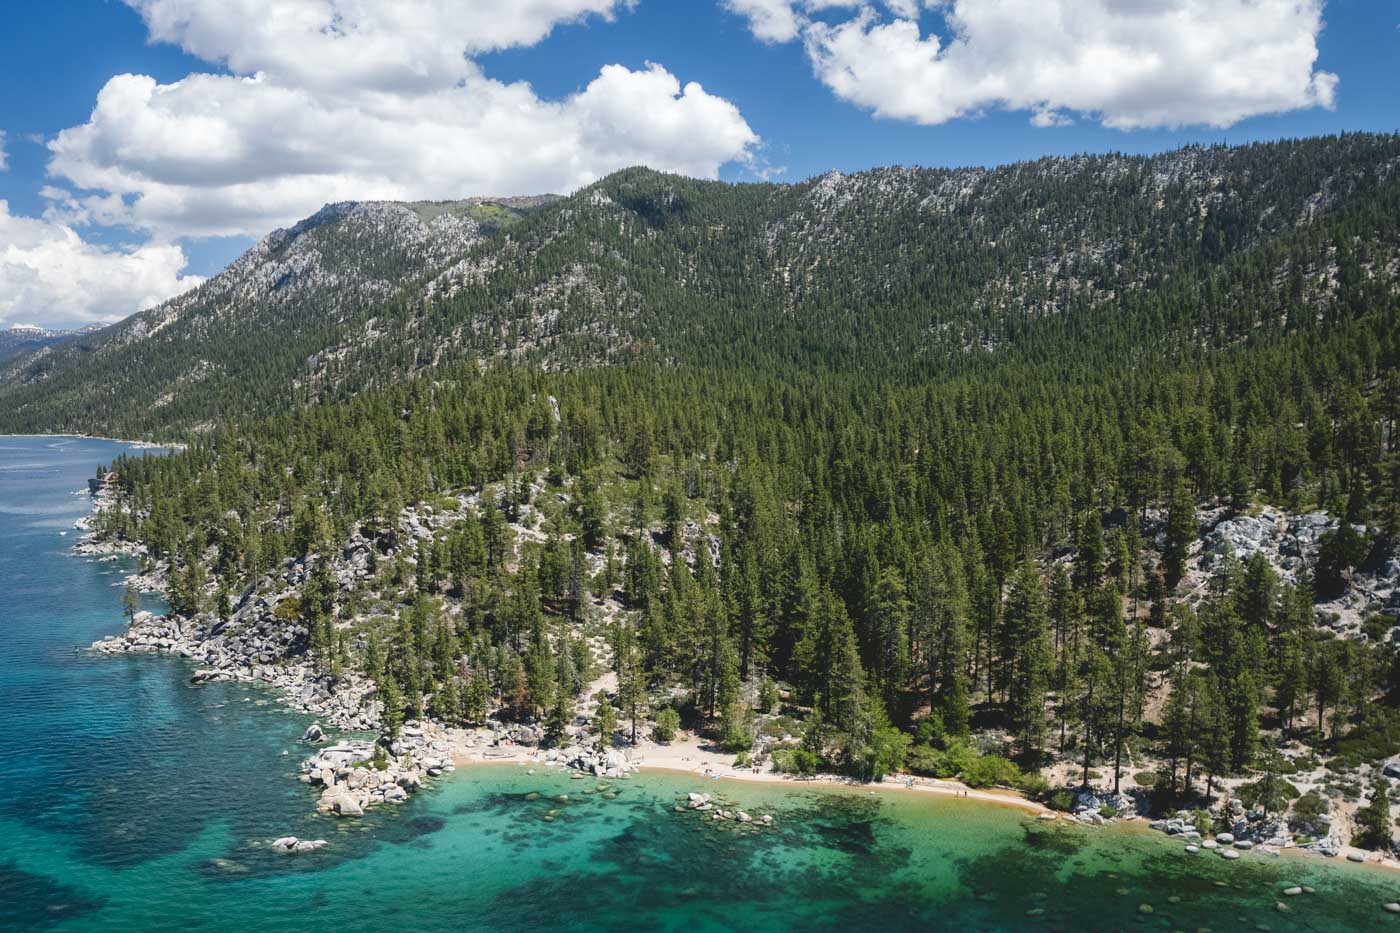 Aerial view over Chimney Beach beside Lake Tahoe with trees covering the mountain.